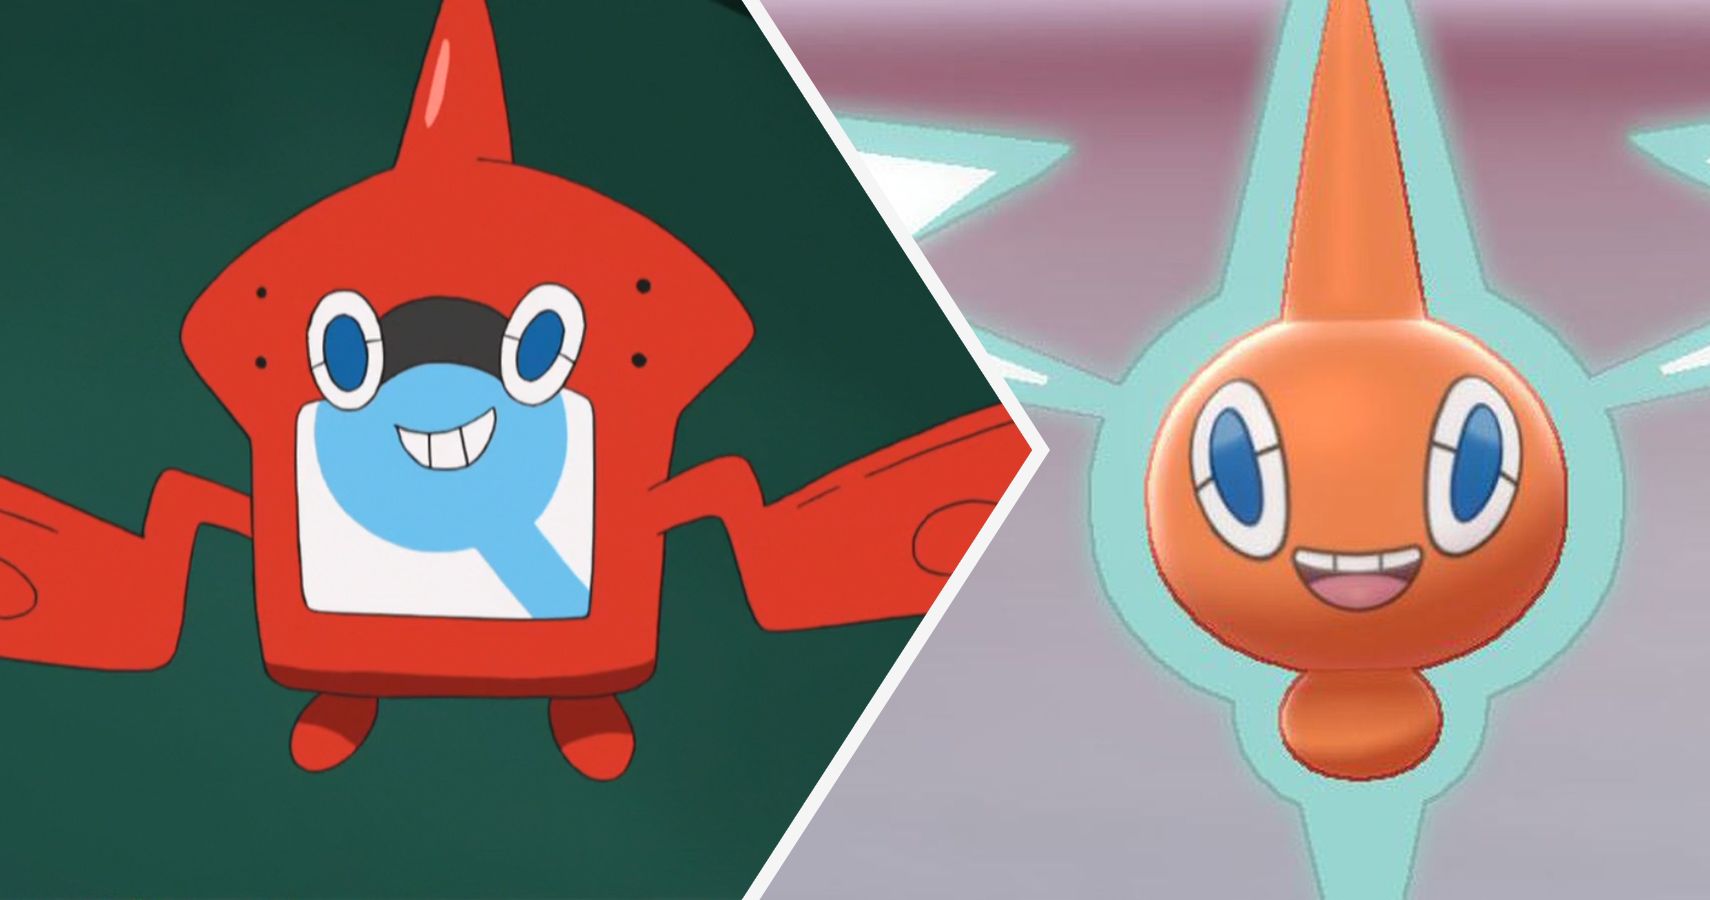 The Pokedex In Pokemon Sword & Shield Is A Smartphone That